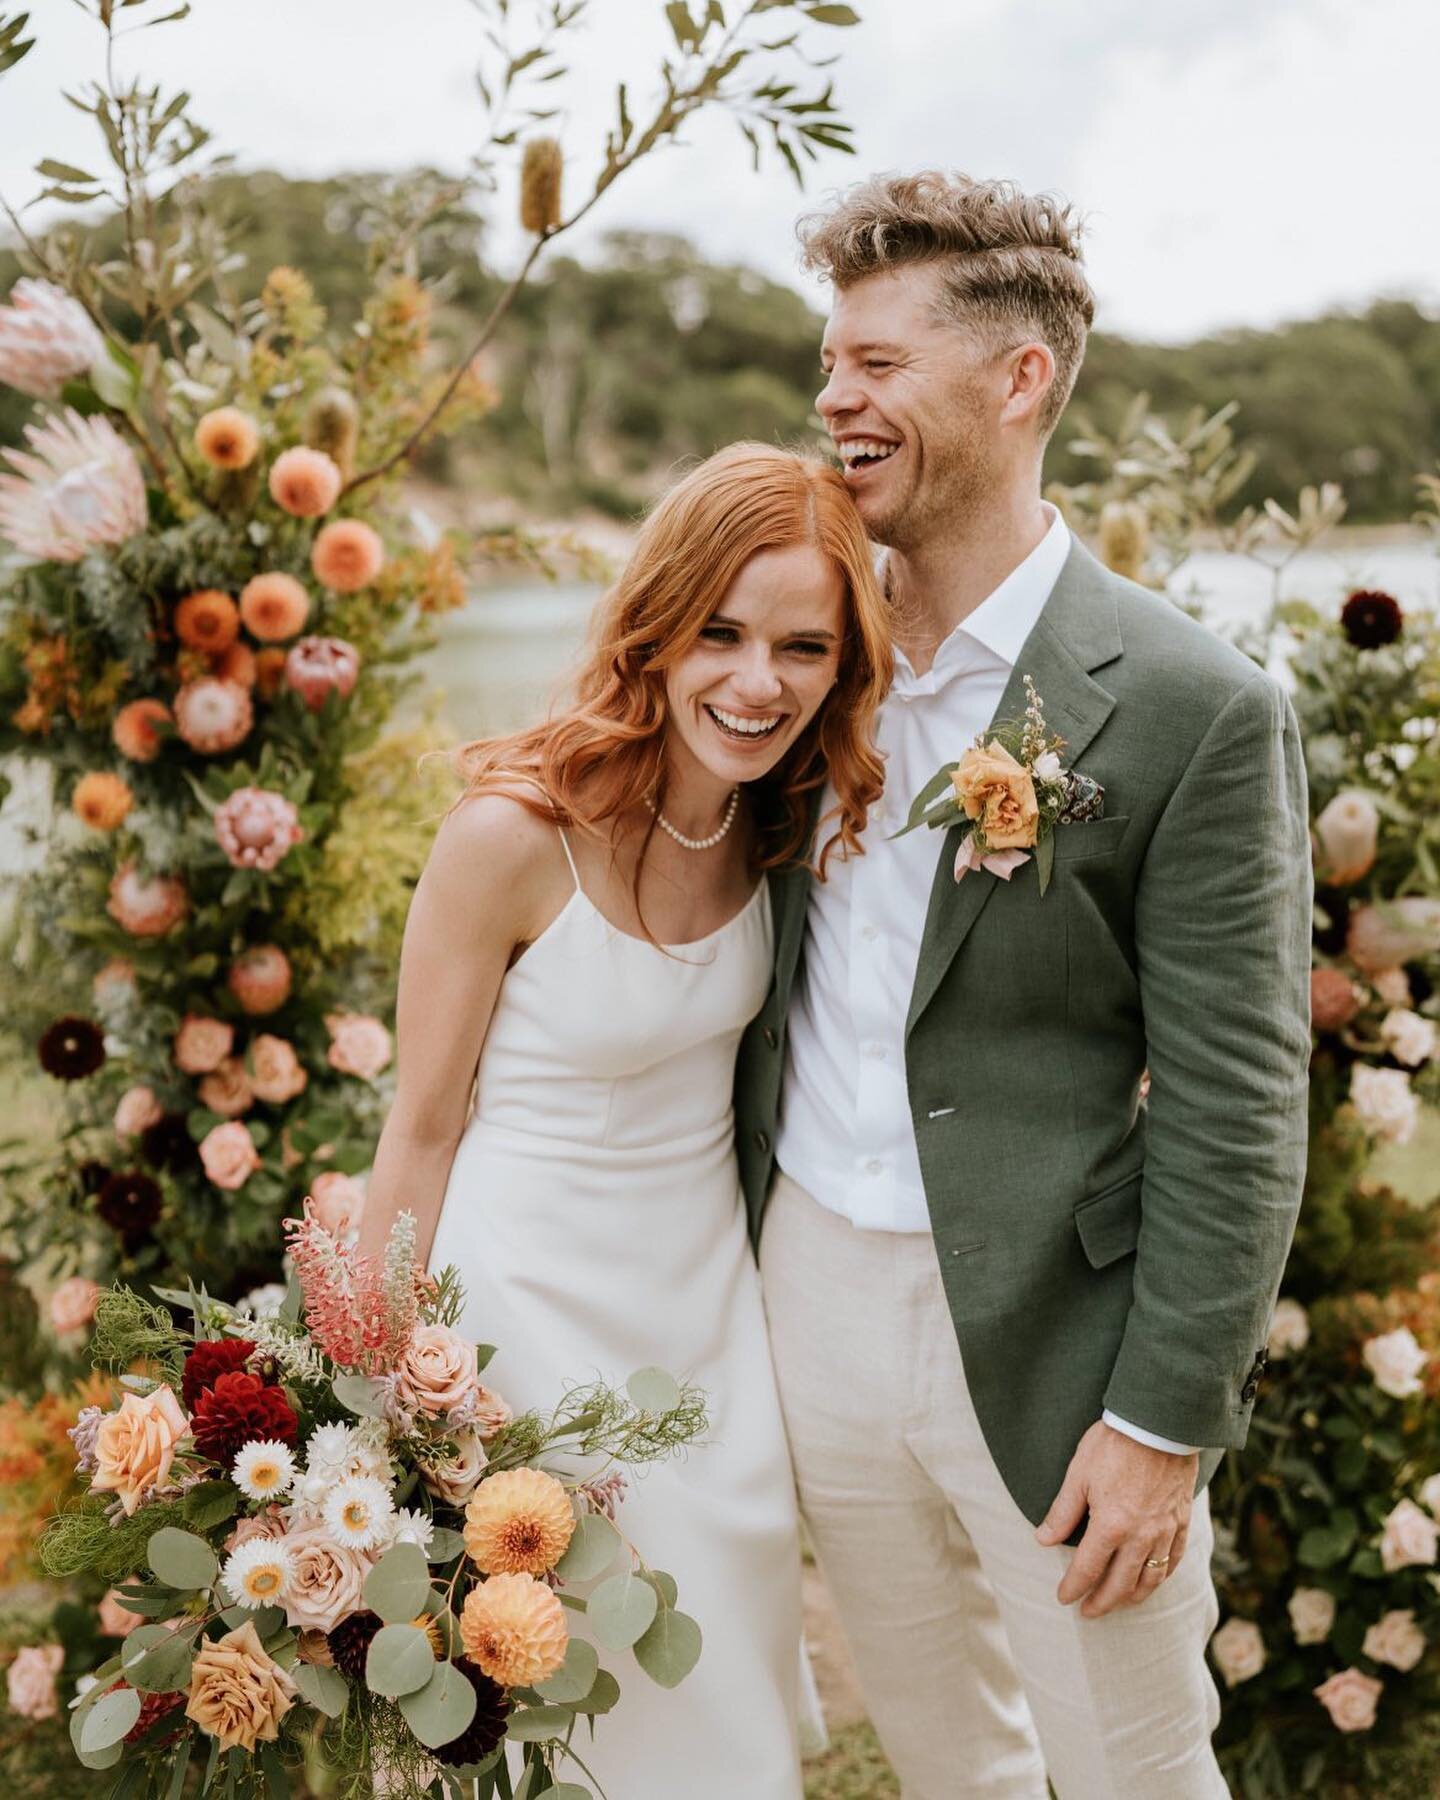 Mimi Floristry has had a huuuuge couple of weeks, finishing off with the wedding of these two eclectic souls at @thecovejervisbay 🌿🦘🐨 Artistry behind the camera lense, @alanataylorphotography capturing those sage and copper tones like magic ✨✨✨